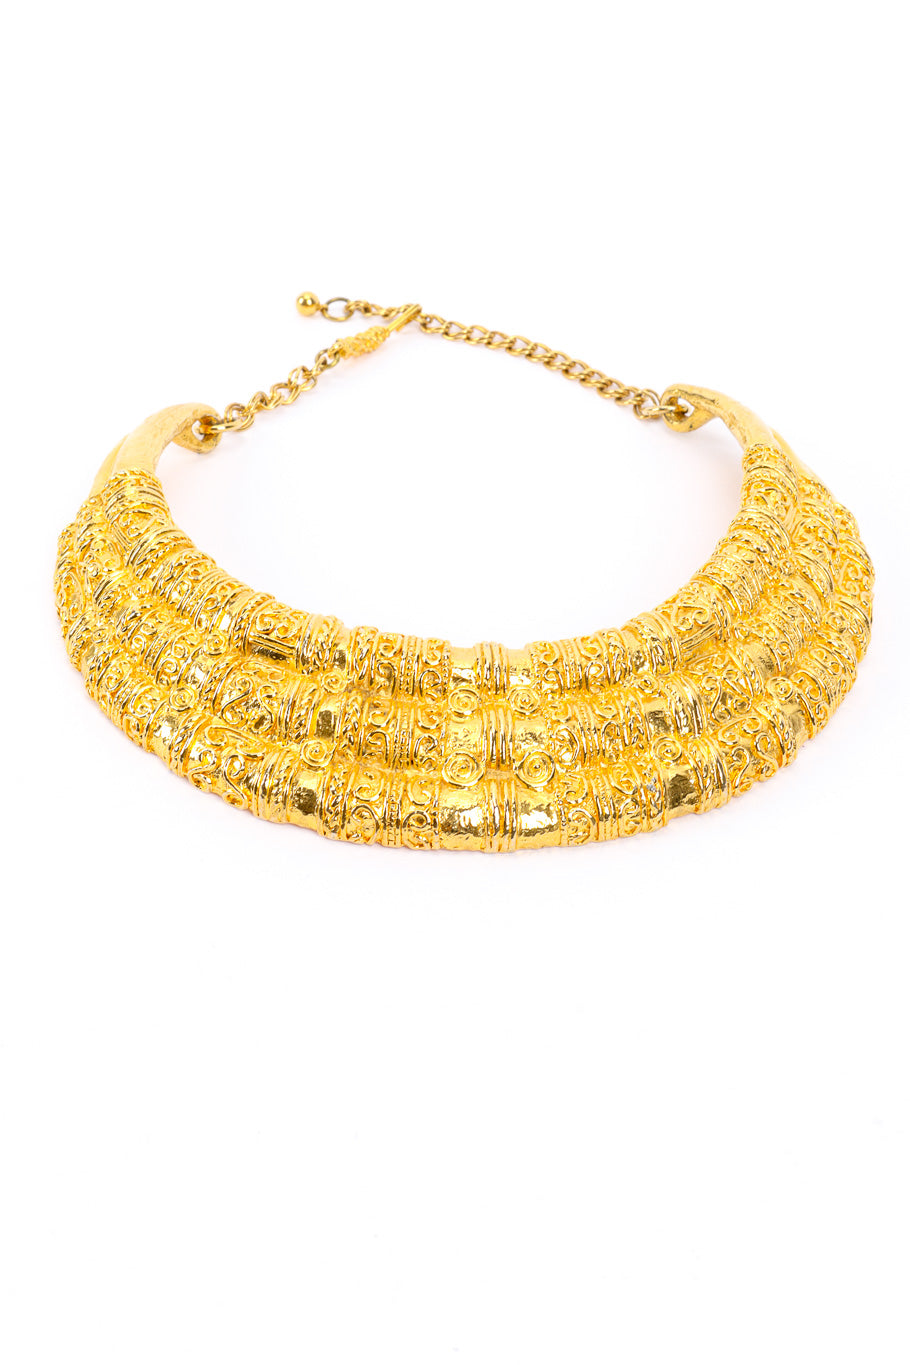 Etruscan Collar Plate Necklace II by Judith Leiber front plate @recessla